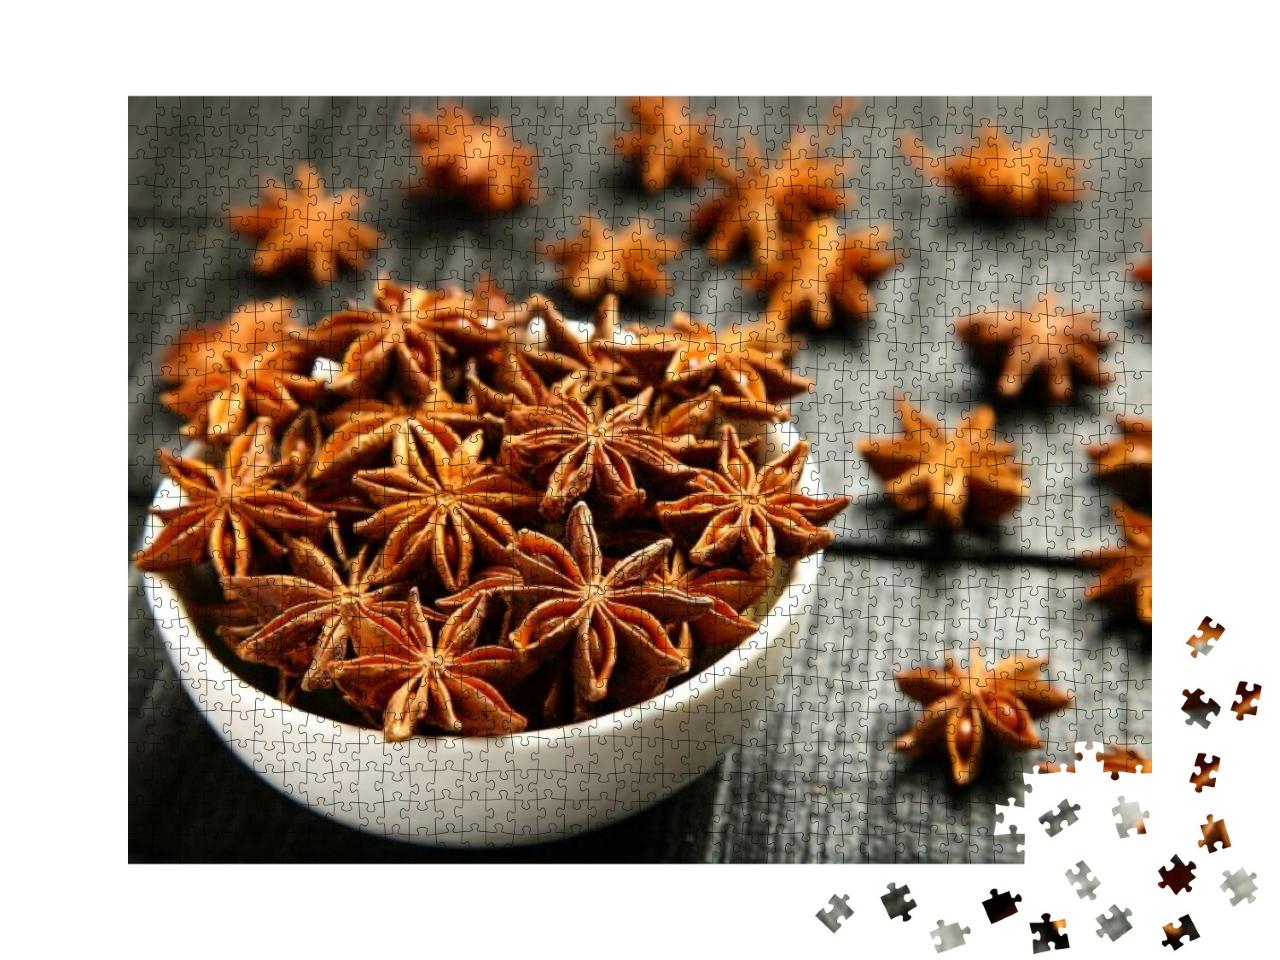 Fresh Organic Star Anise Spice Fruits & Seeds... Jigsaw Puzzle with 1000 pieces